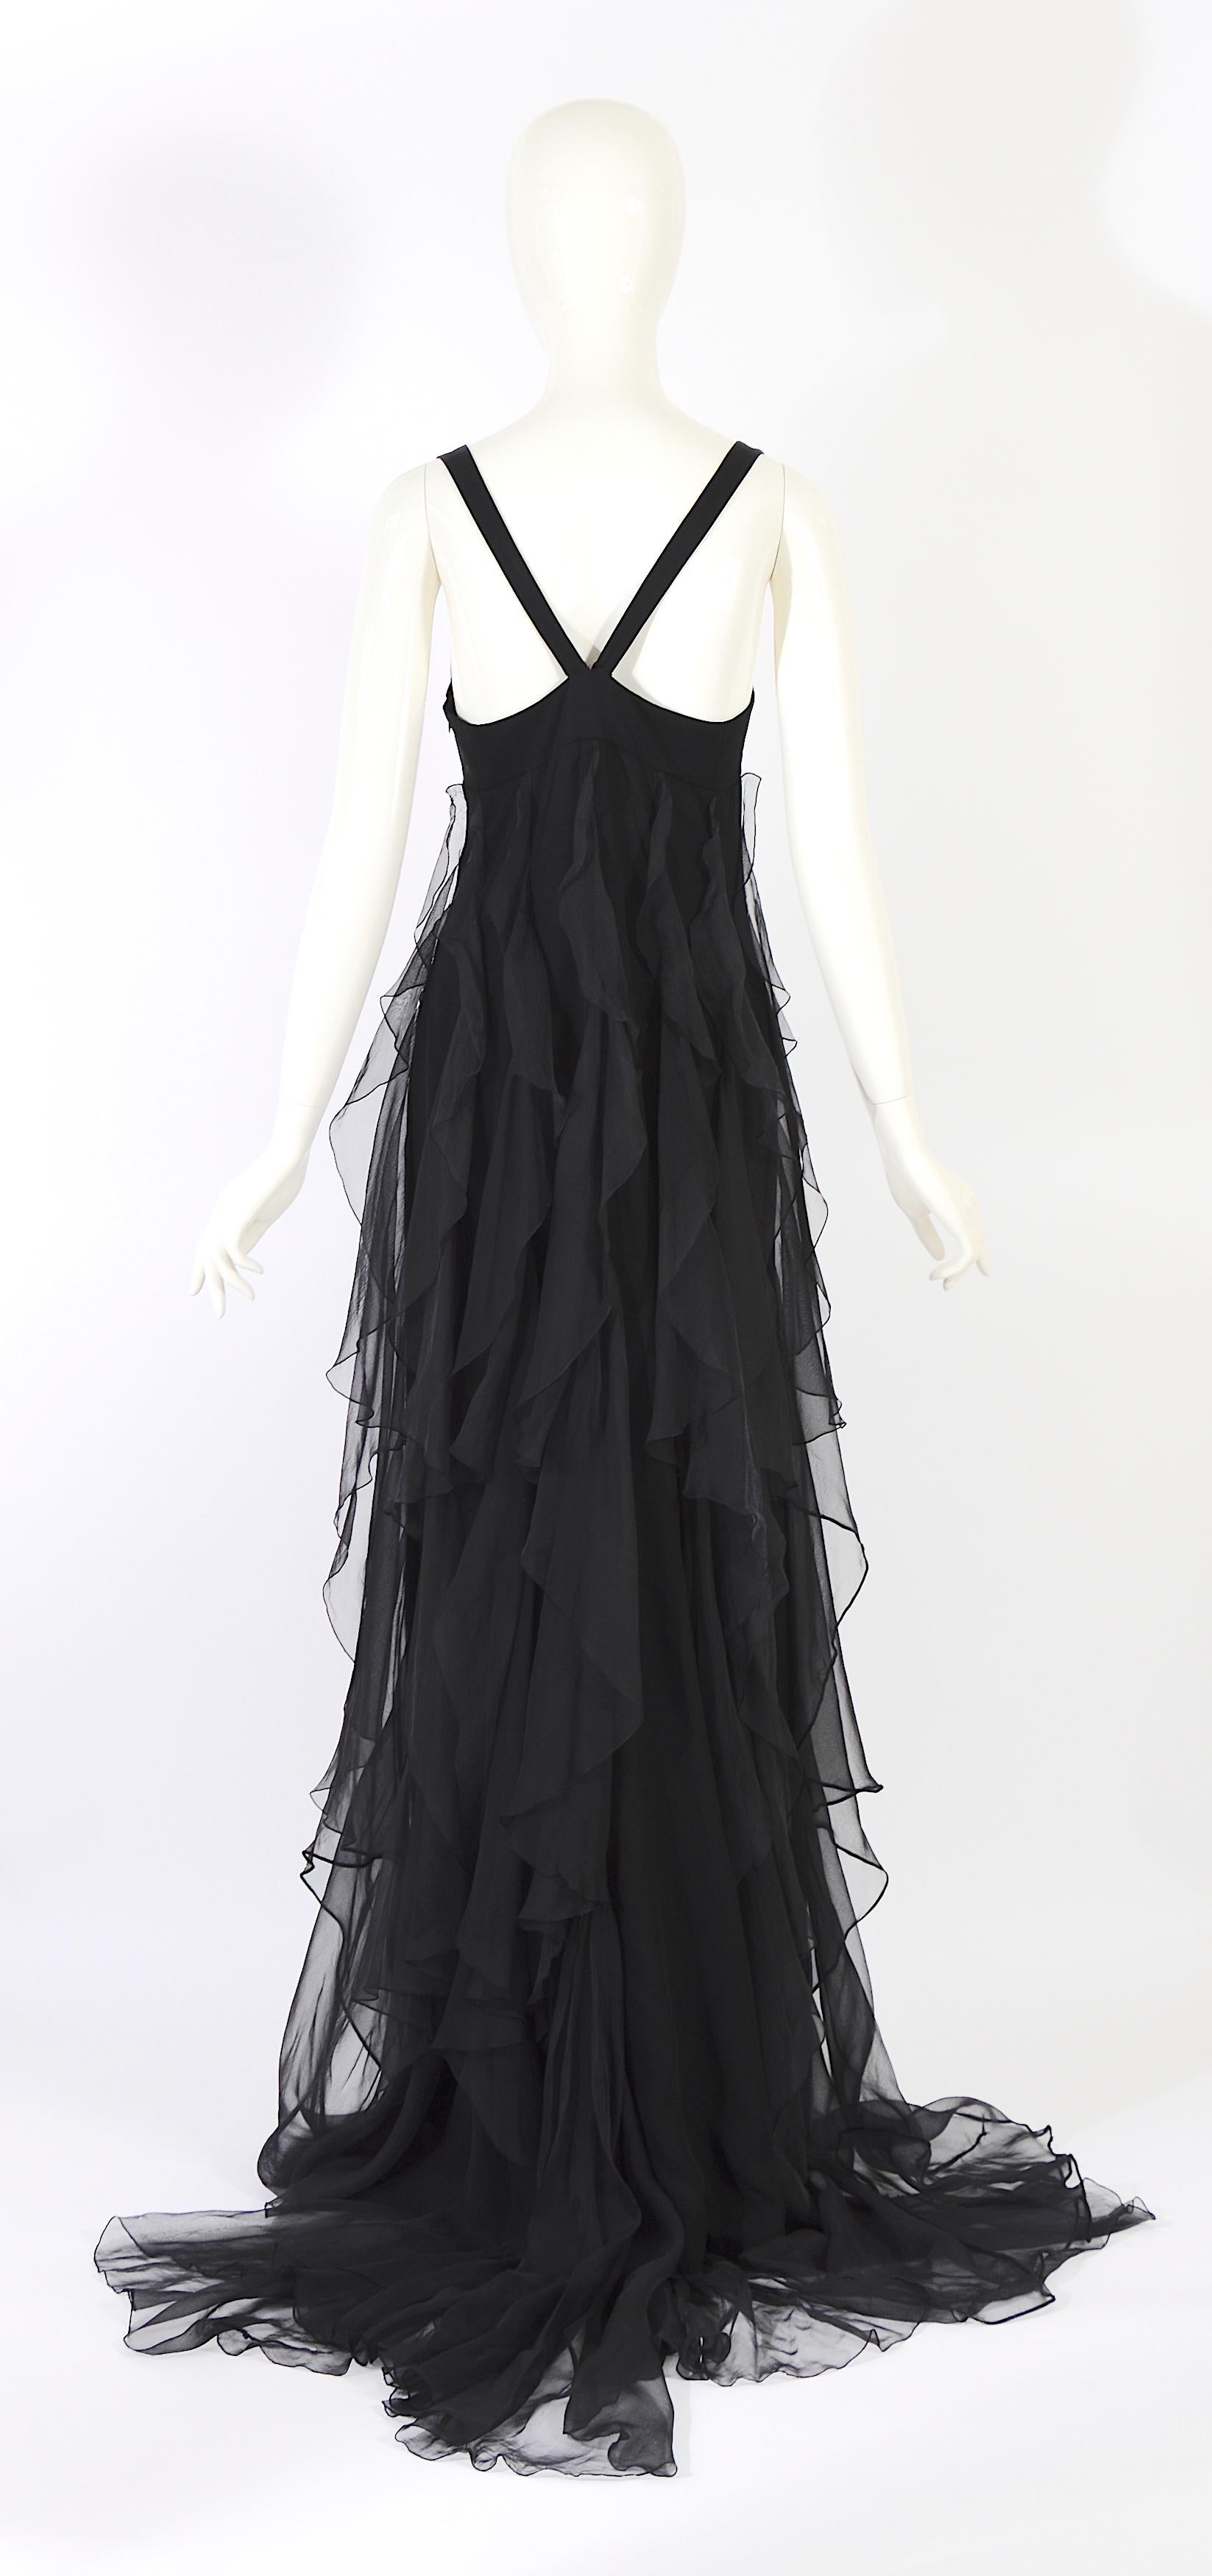 Christian Dior by Gianfranco Ferre S/S 1994 vintage black silk evening dress For Sale 2